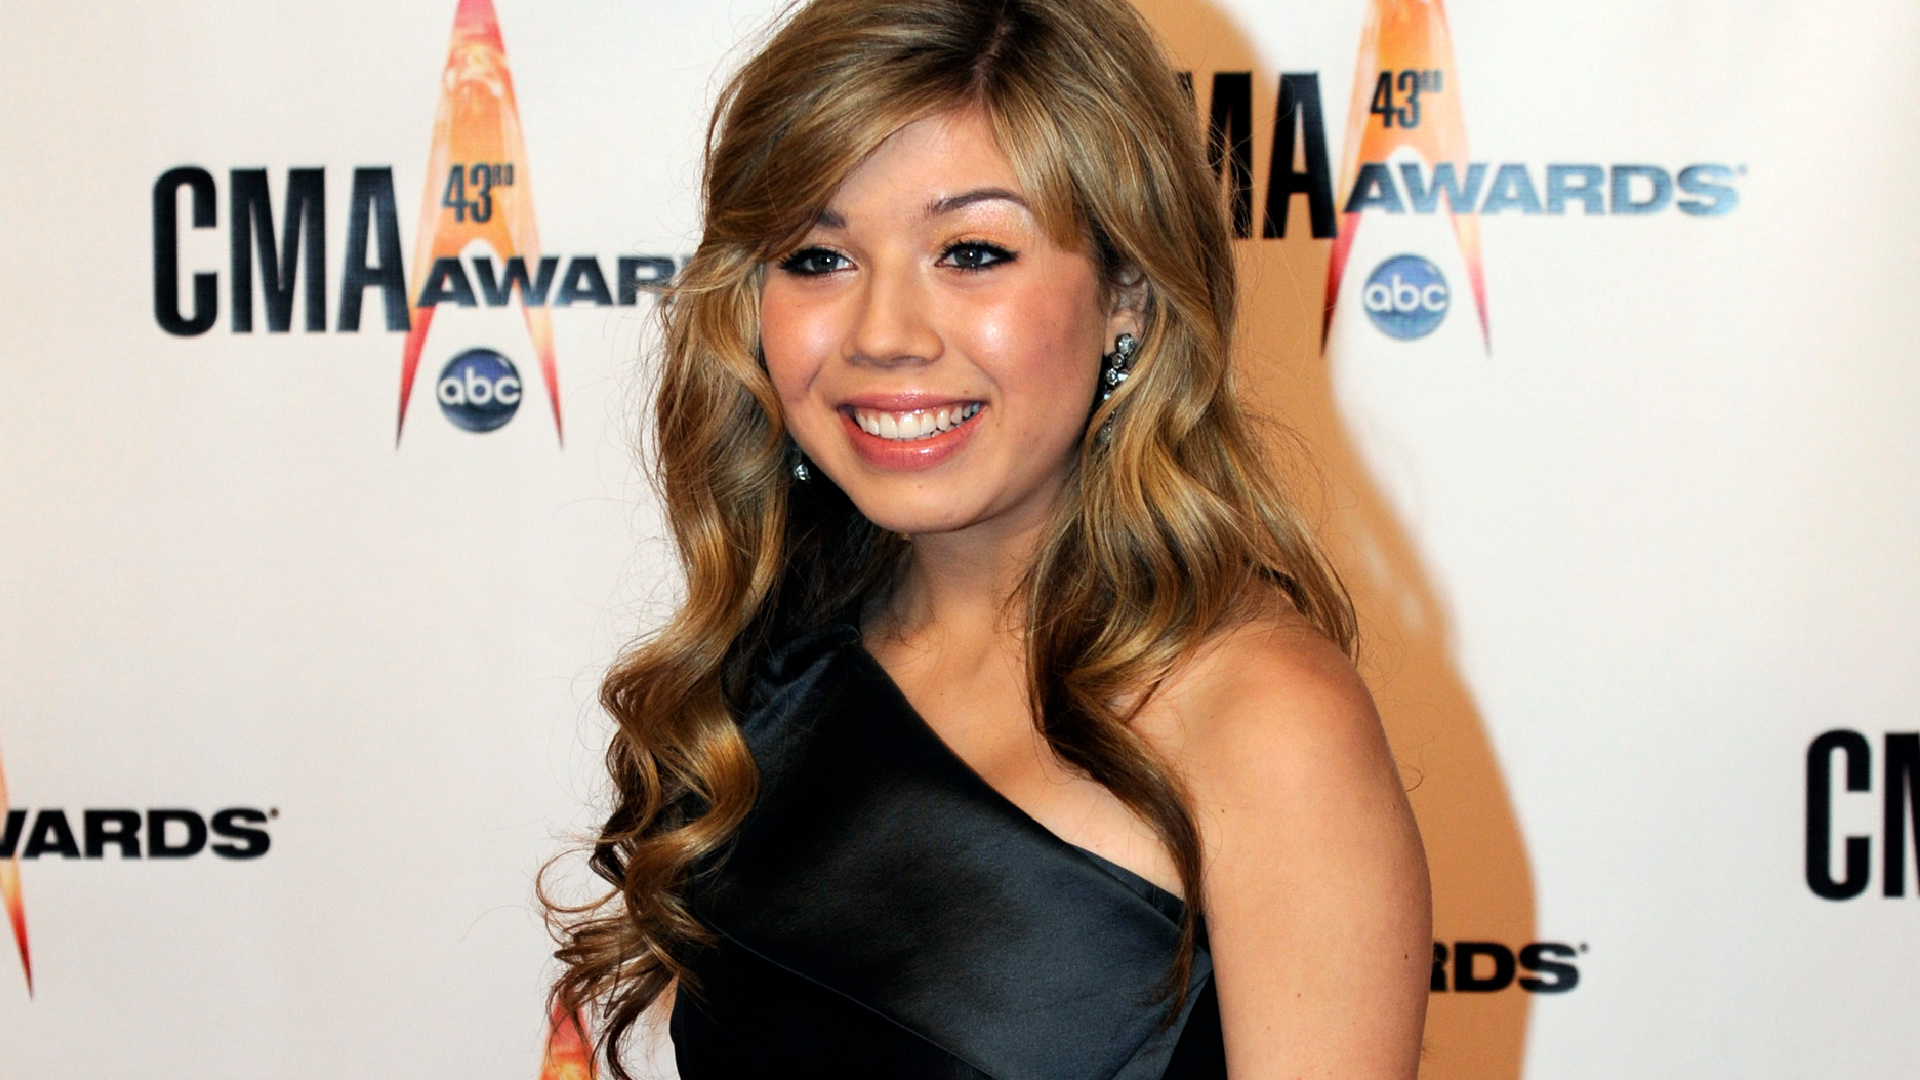 The origins of Jennette McCurdy